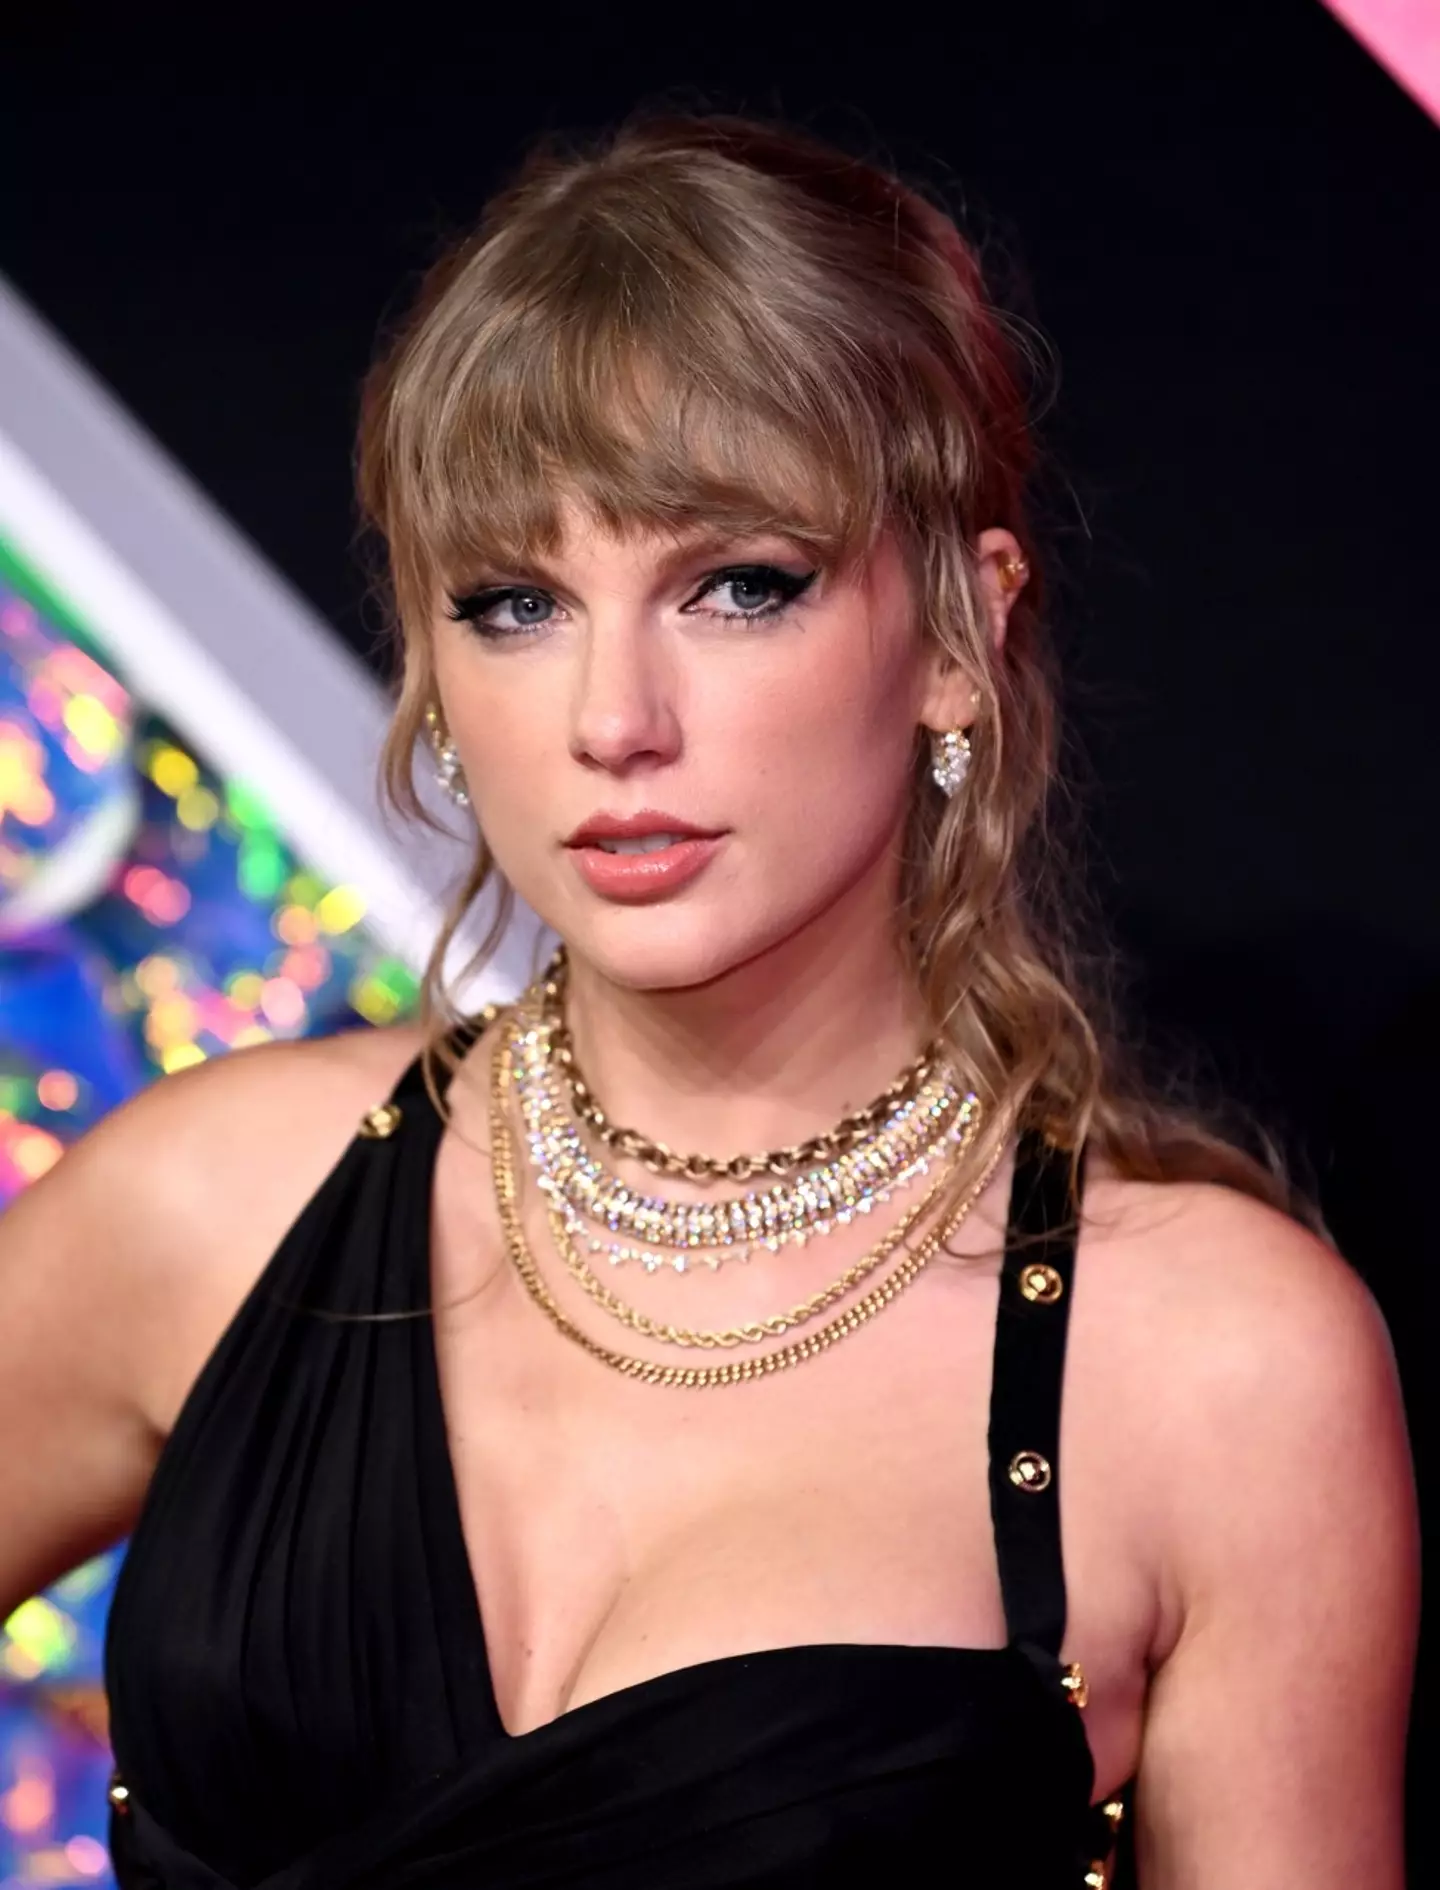 Taylor Swift is 'overwhelmed by grief' after learning about the death of one of her fans prior to her show in Brazil.